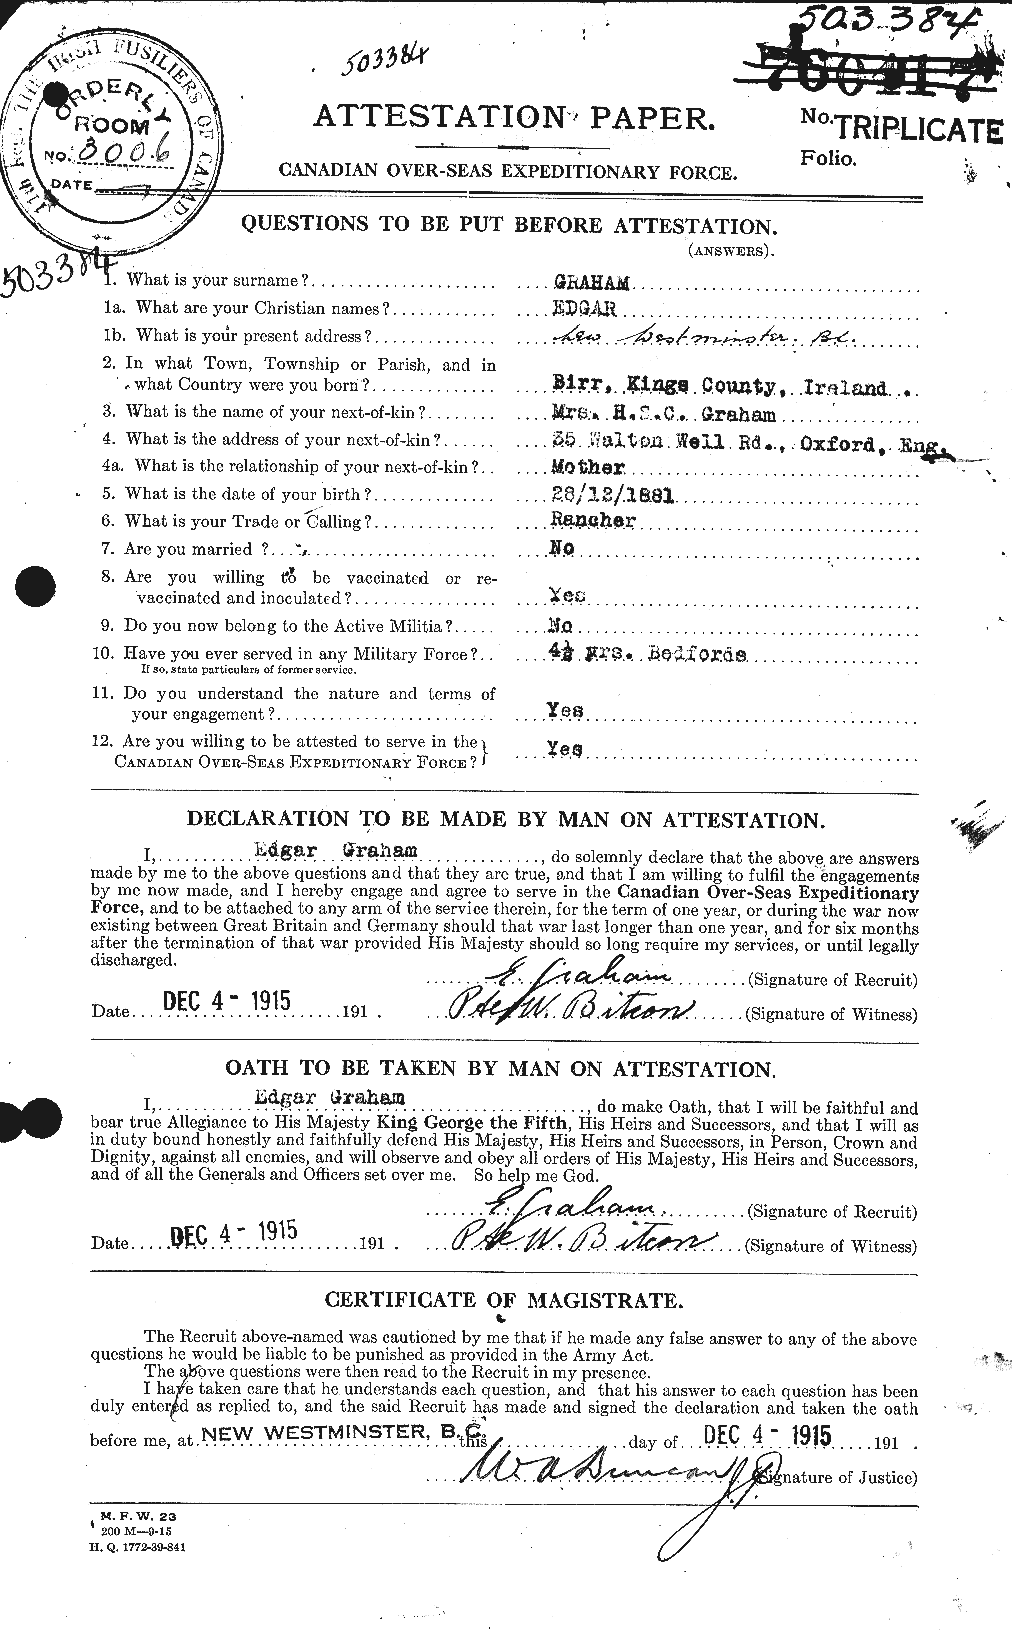 Personnel Records of the First World War - CEF 353860a